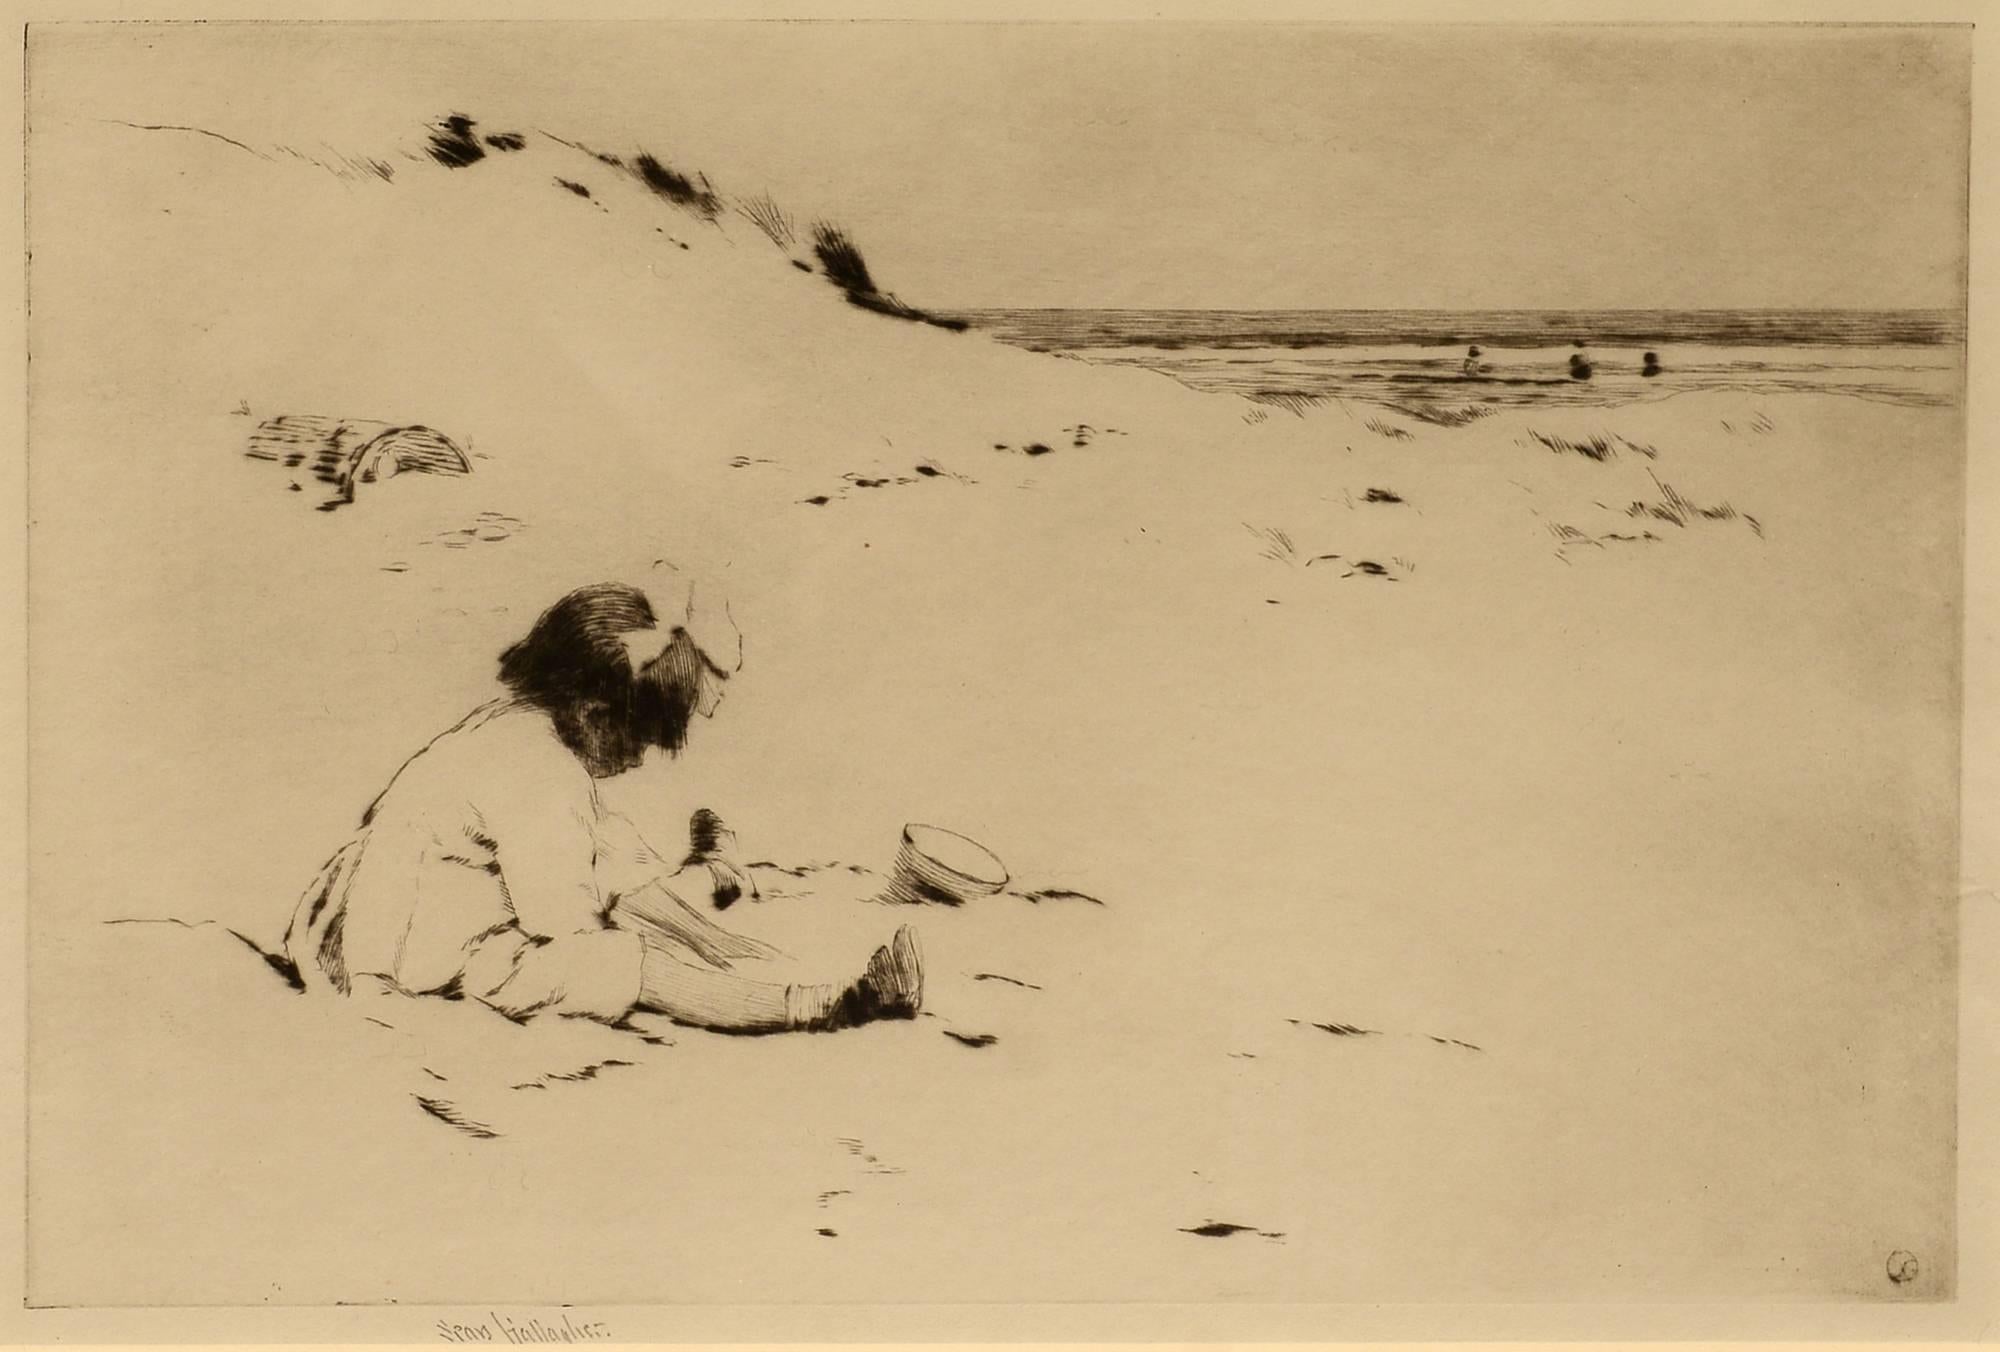 Sears Gallagher Figurative Print - Child by the Dunes